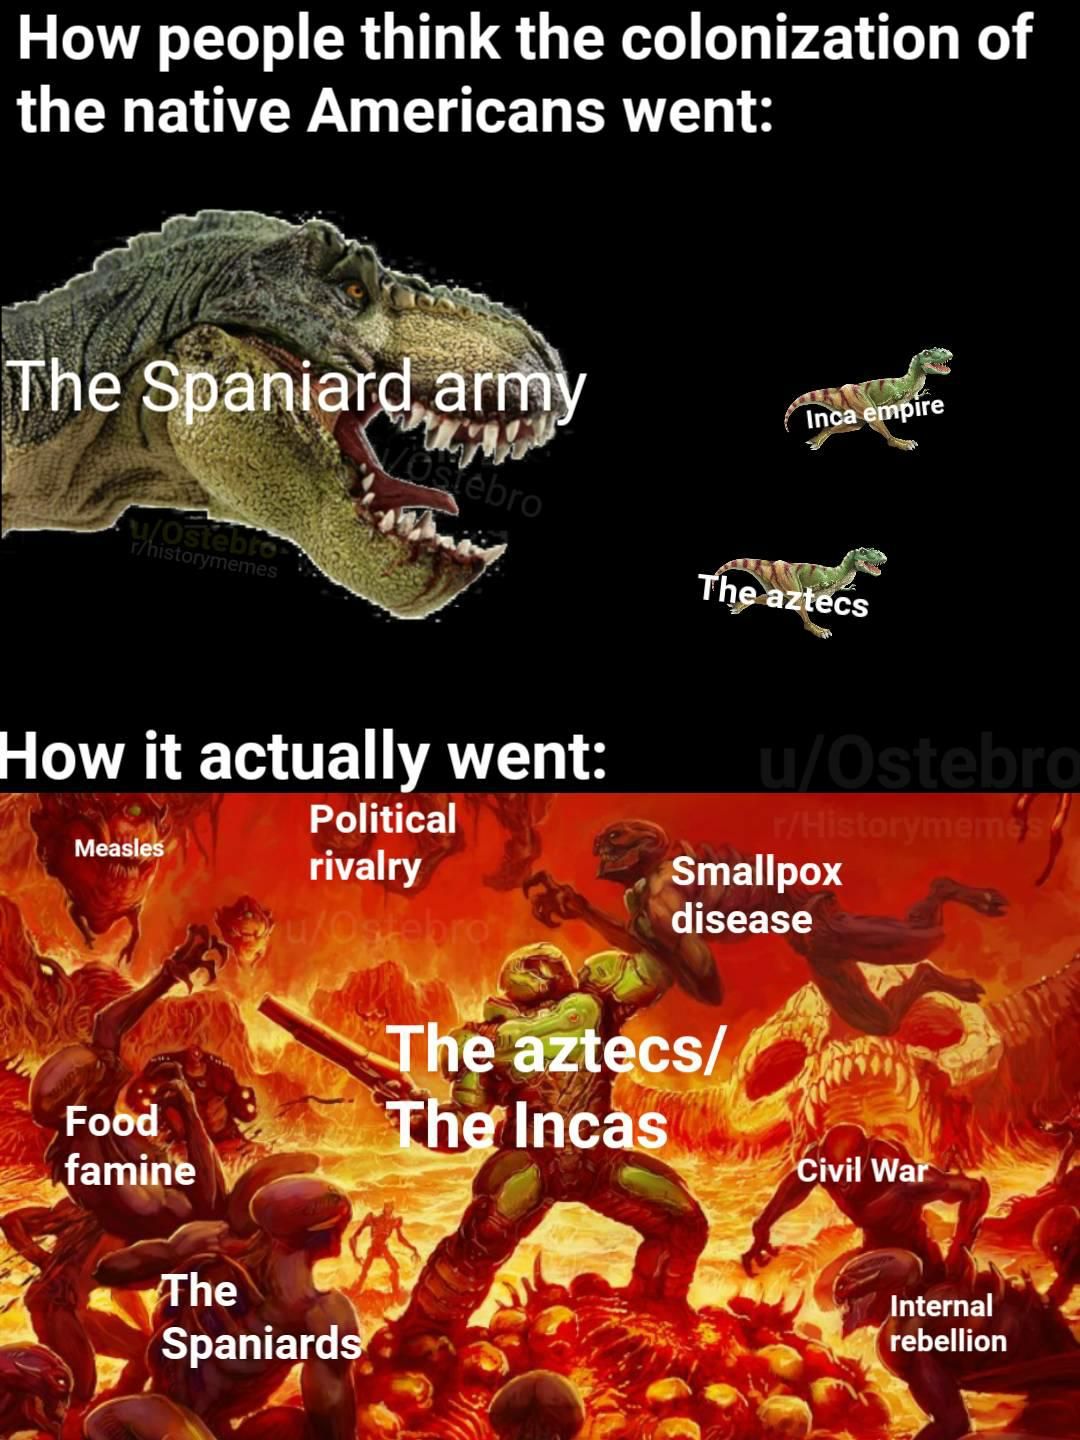 The Incas almost defeated the Spaniards